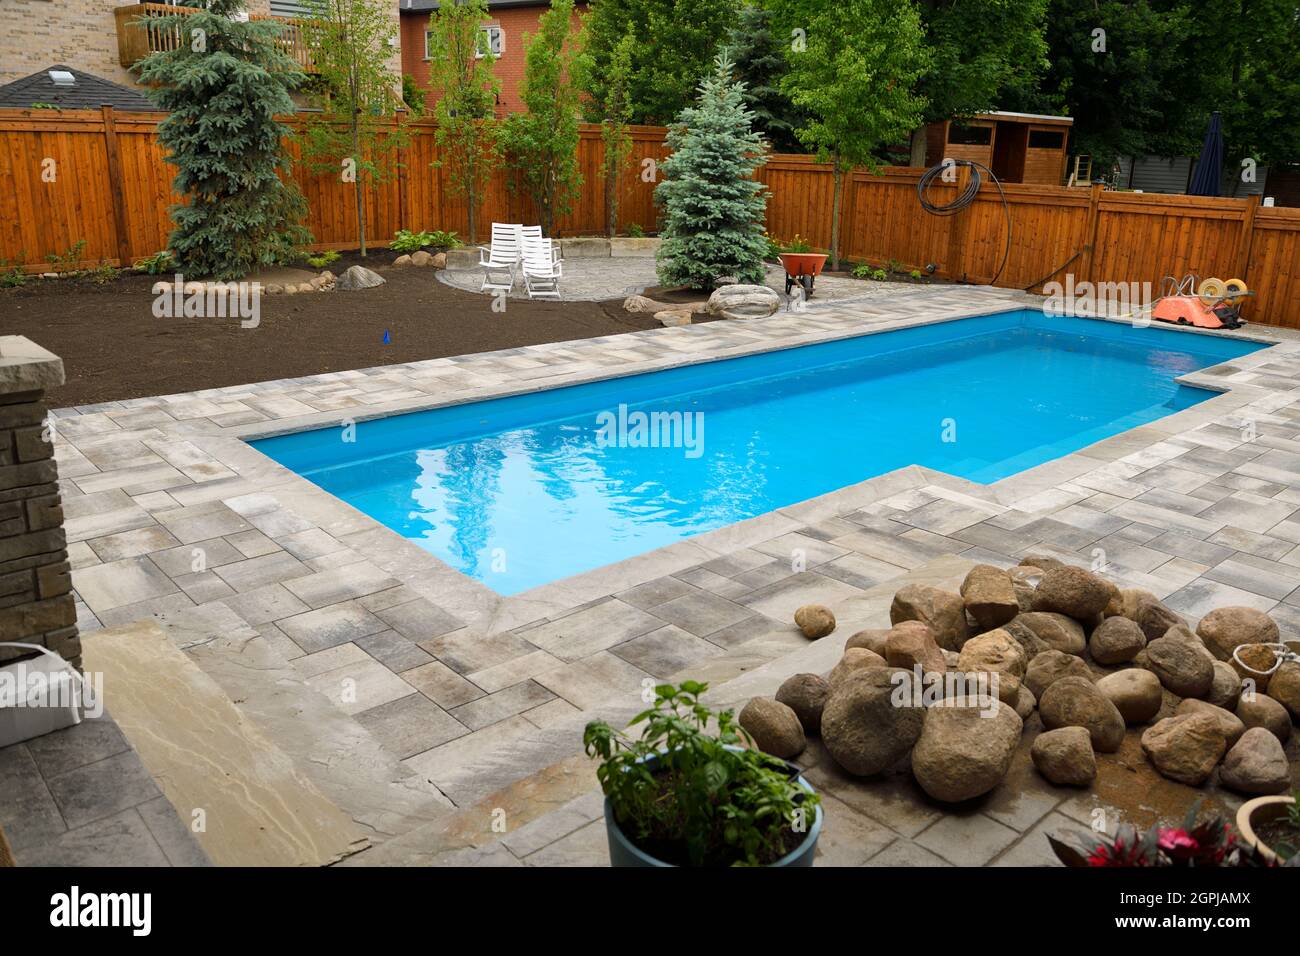 Newly installed swimming pool in Spring with unfinished, back yard landscaping construction ongoing Stock Photo